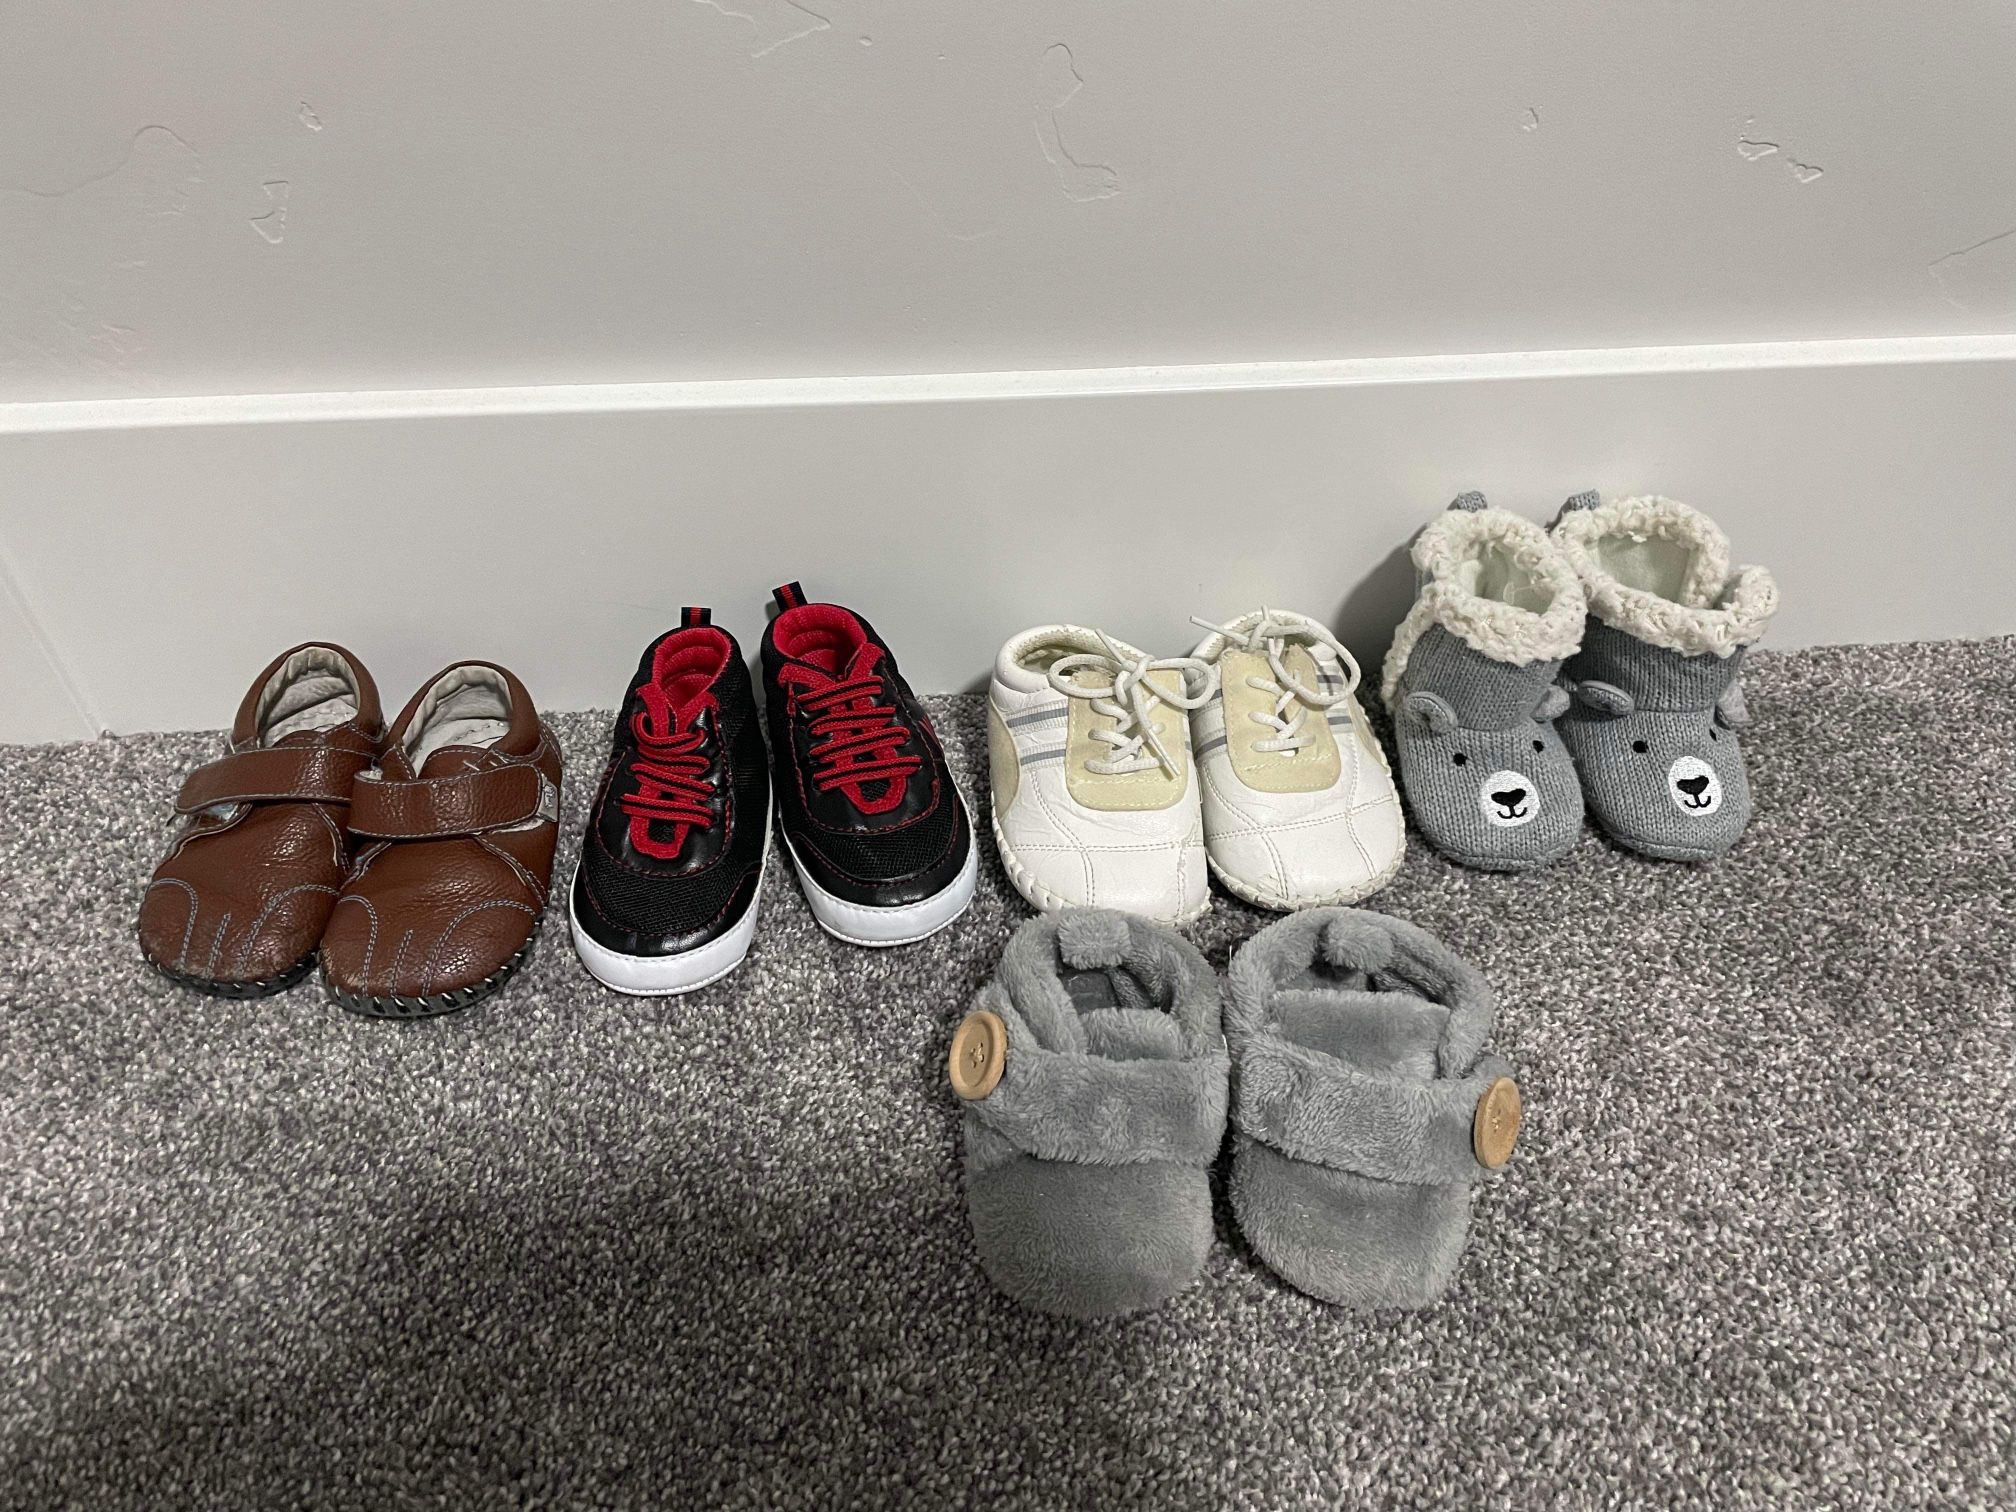 baby shoes size 2-3